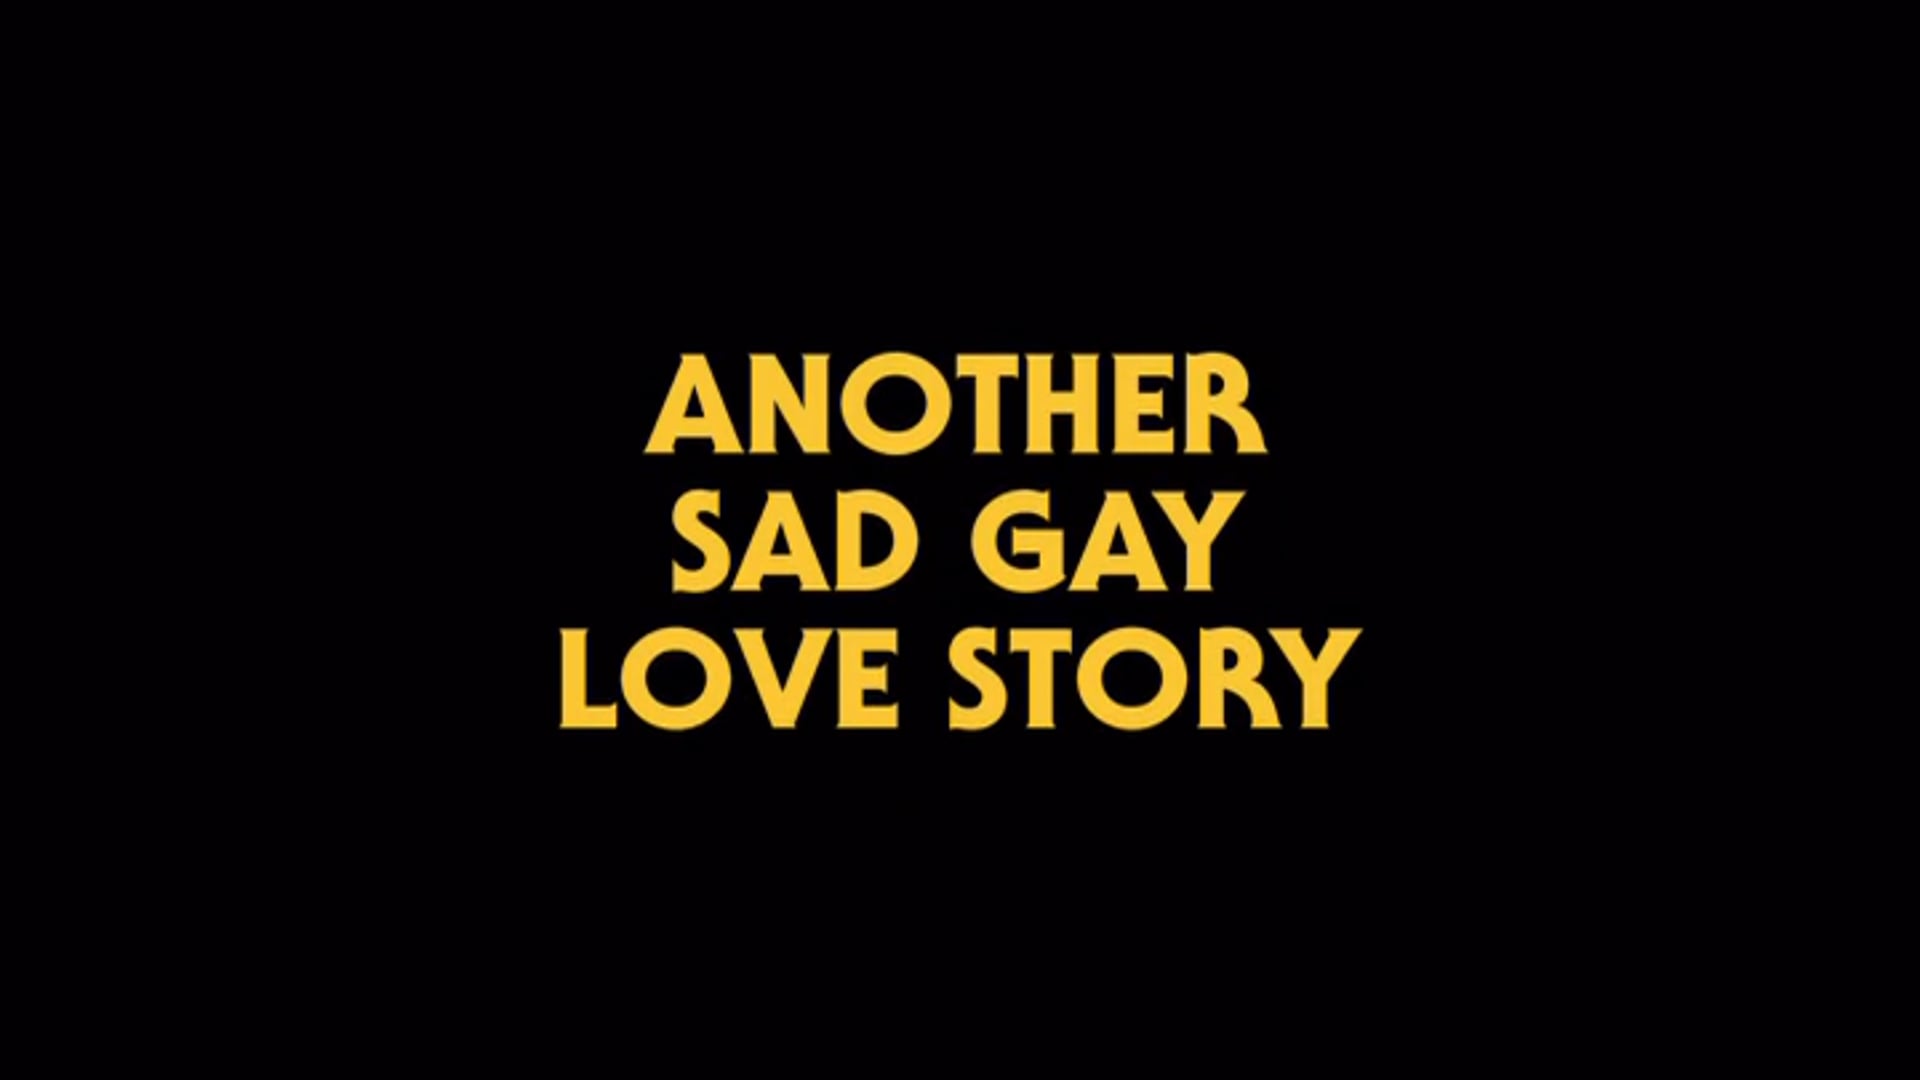 Another Sad Gay Love Story - Credits